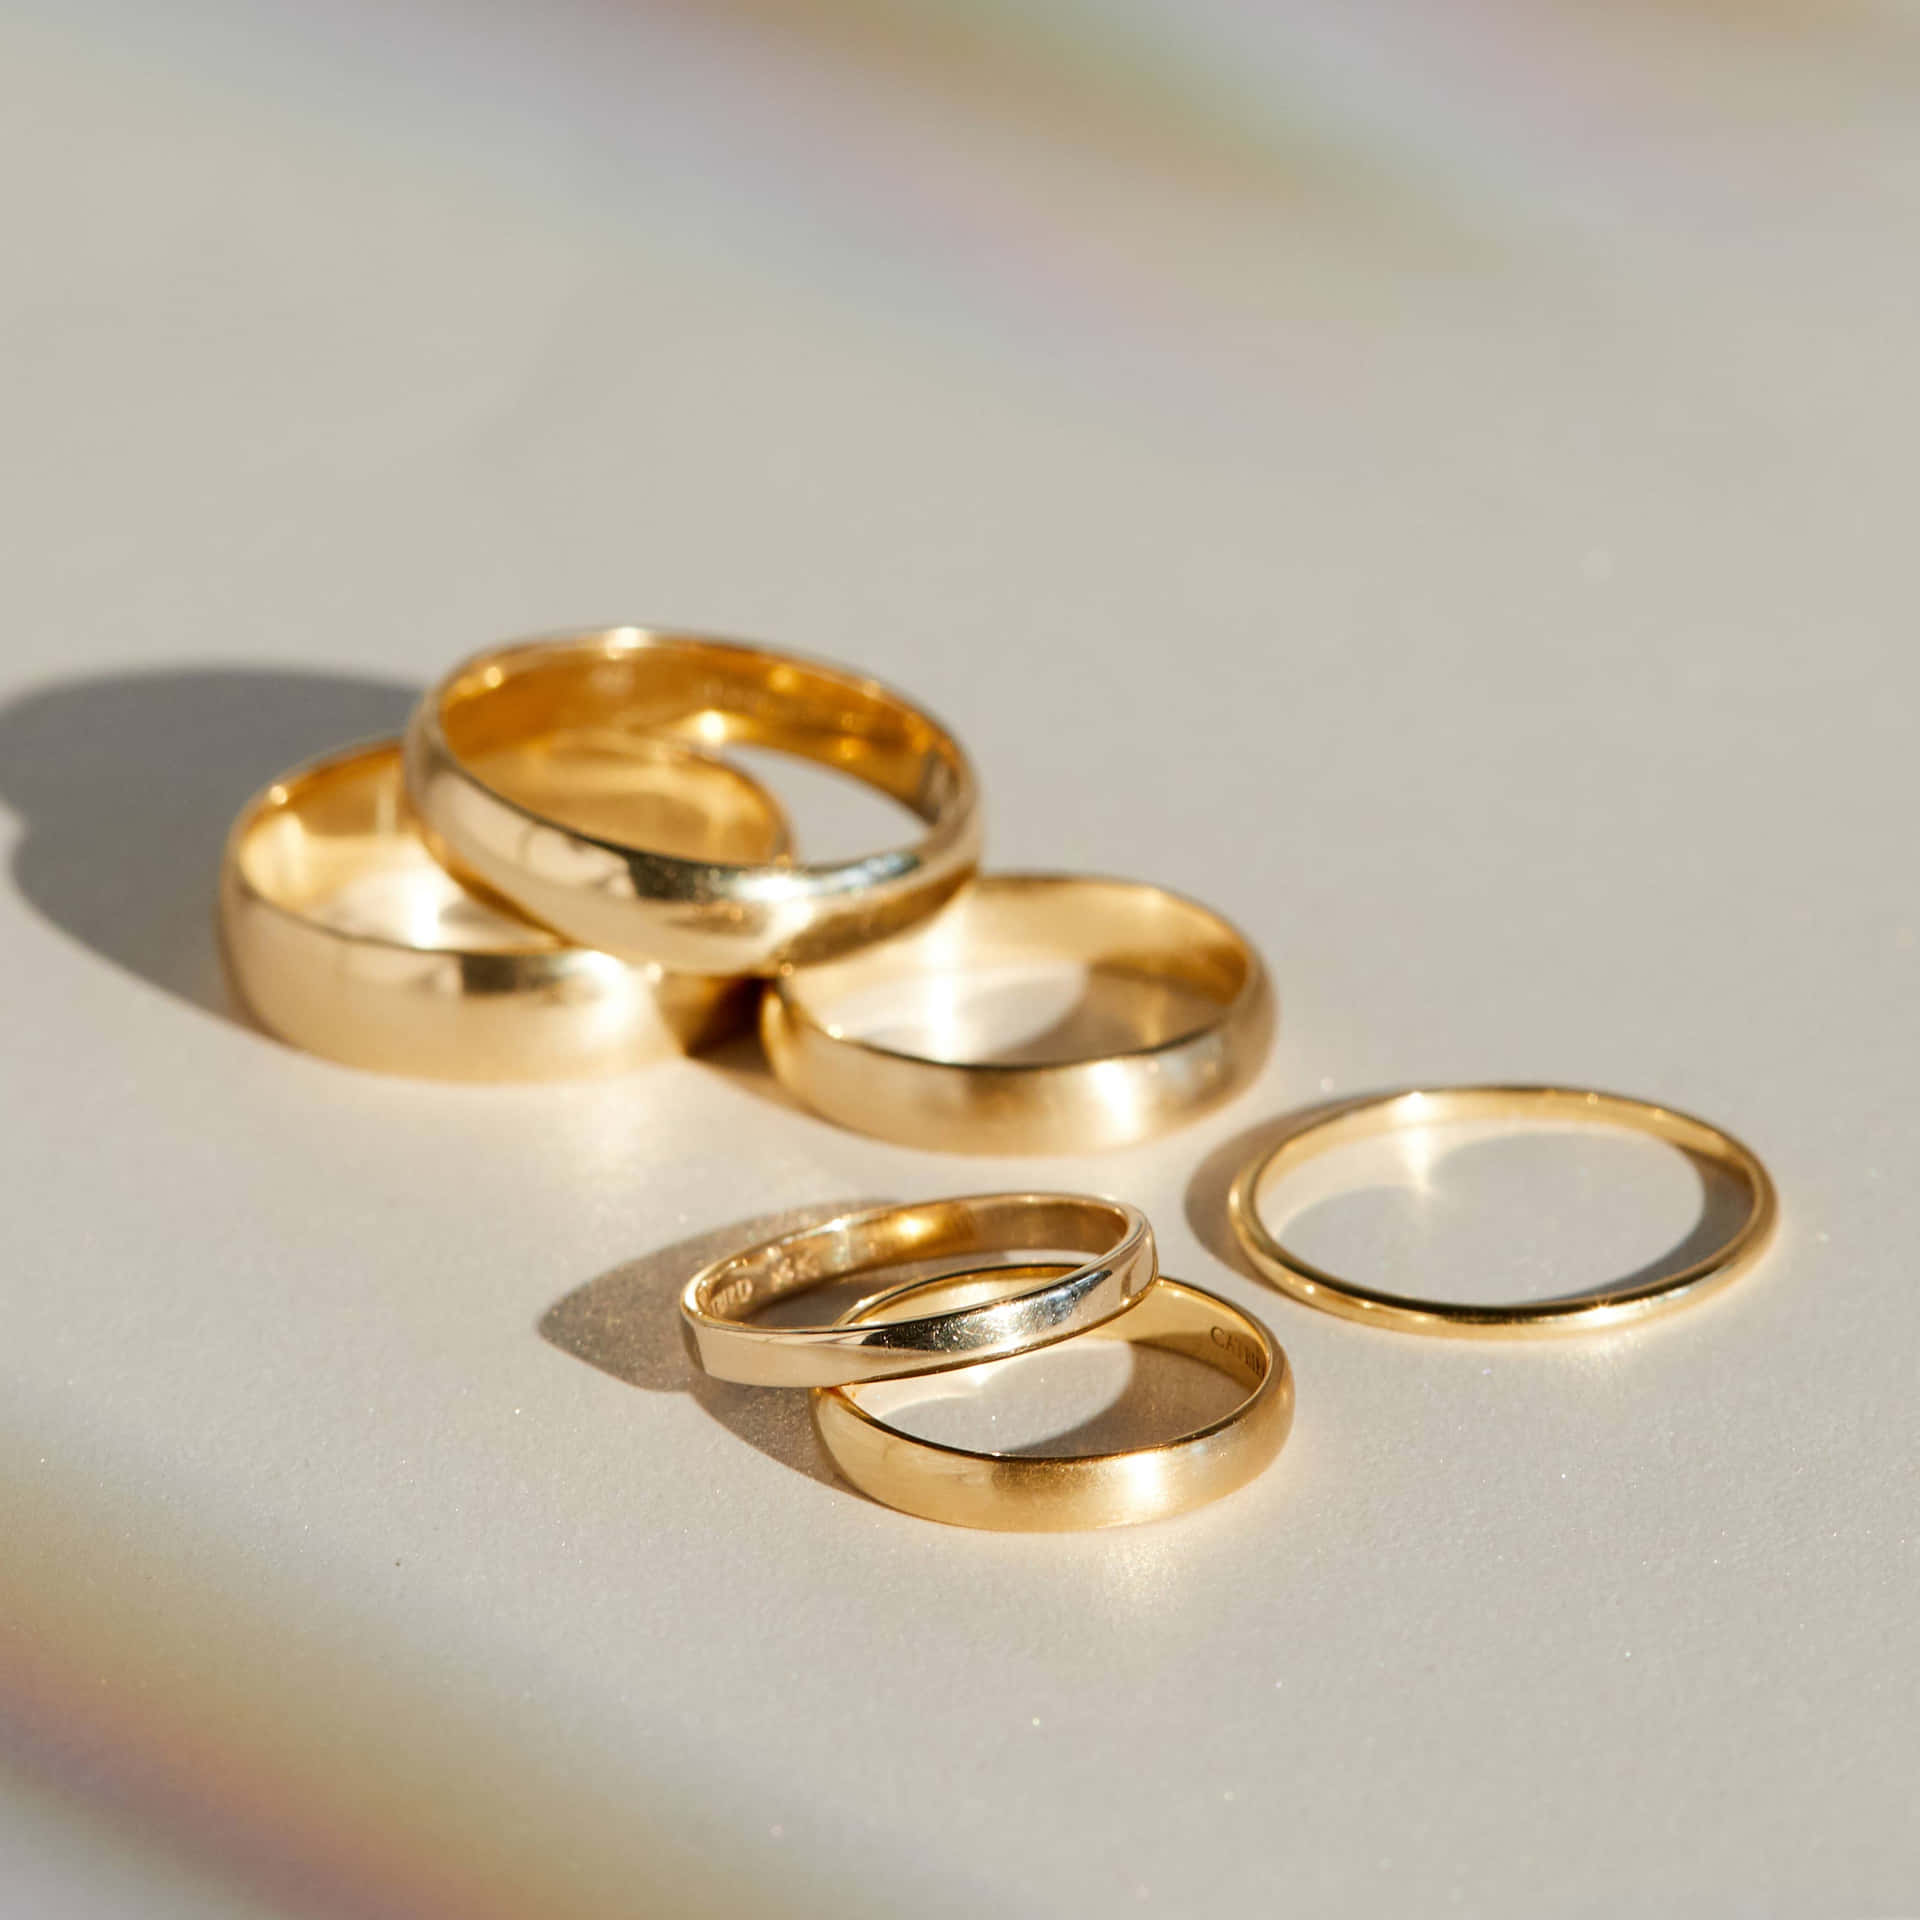 Two delicate gold wedding rings ready to be placed on happy future spouses